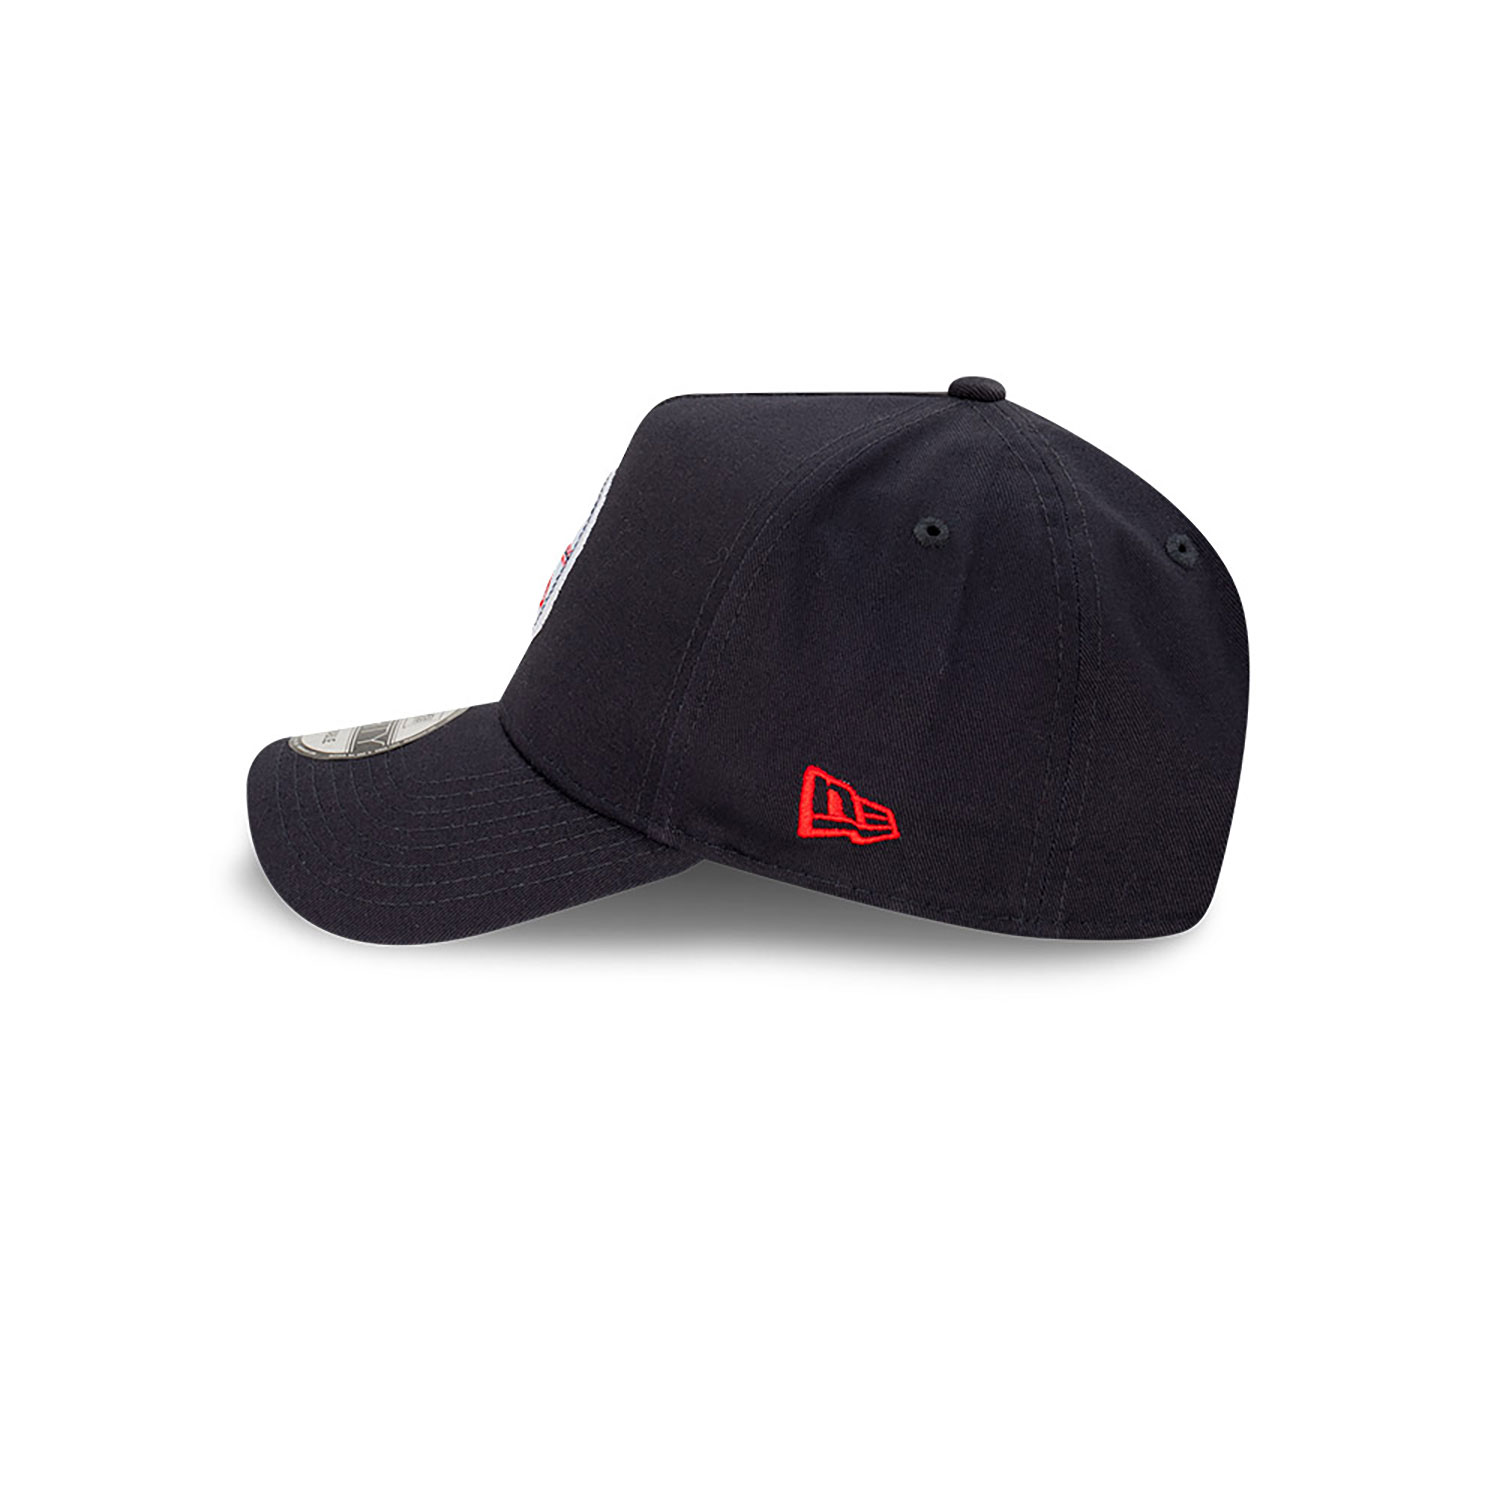 Boston Red Sox Cooperstown Wordmark Navy 9FORTY A-Frame Adjustable Cap